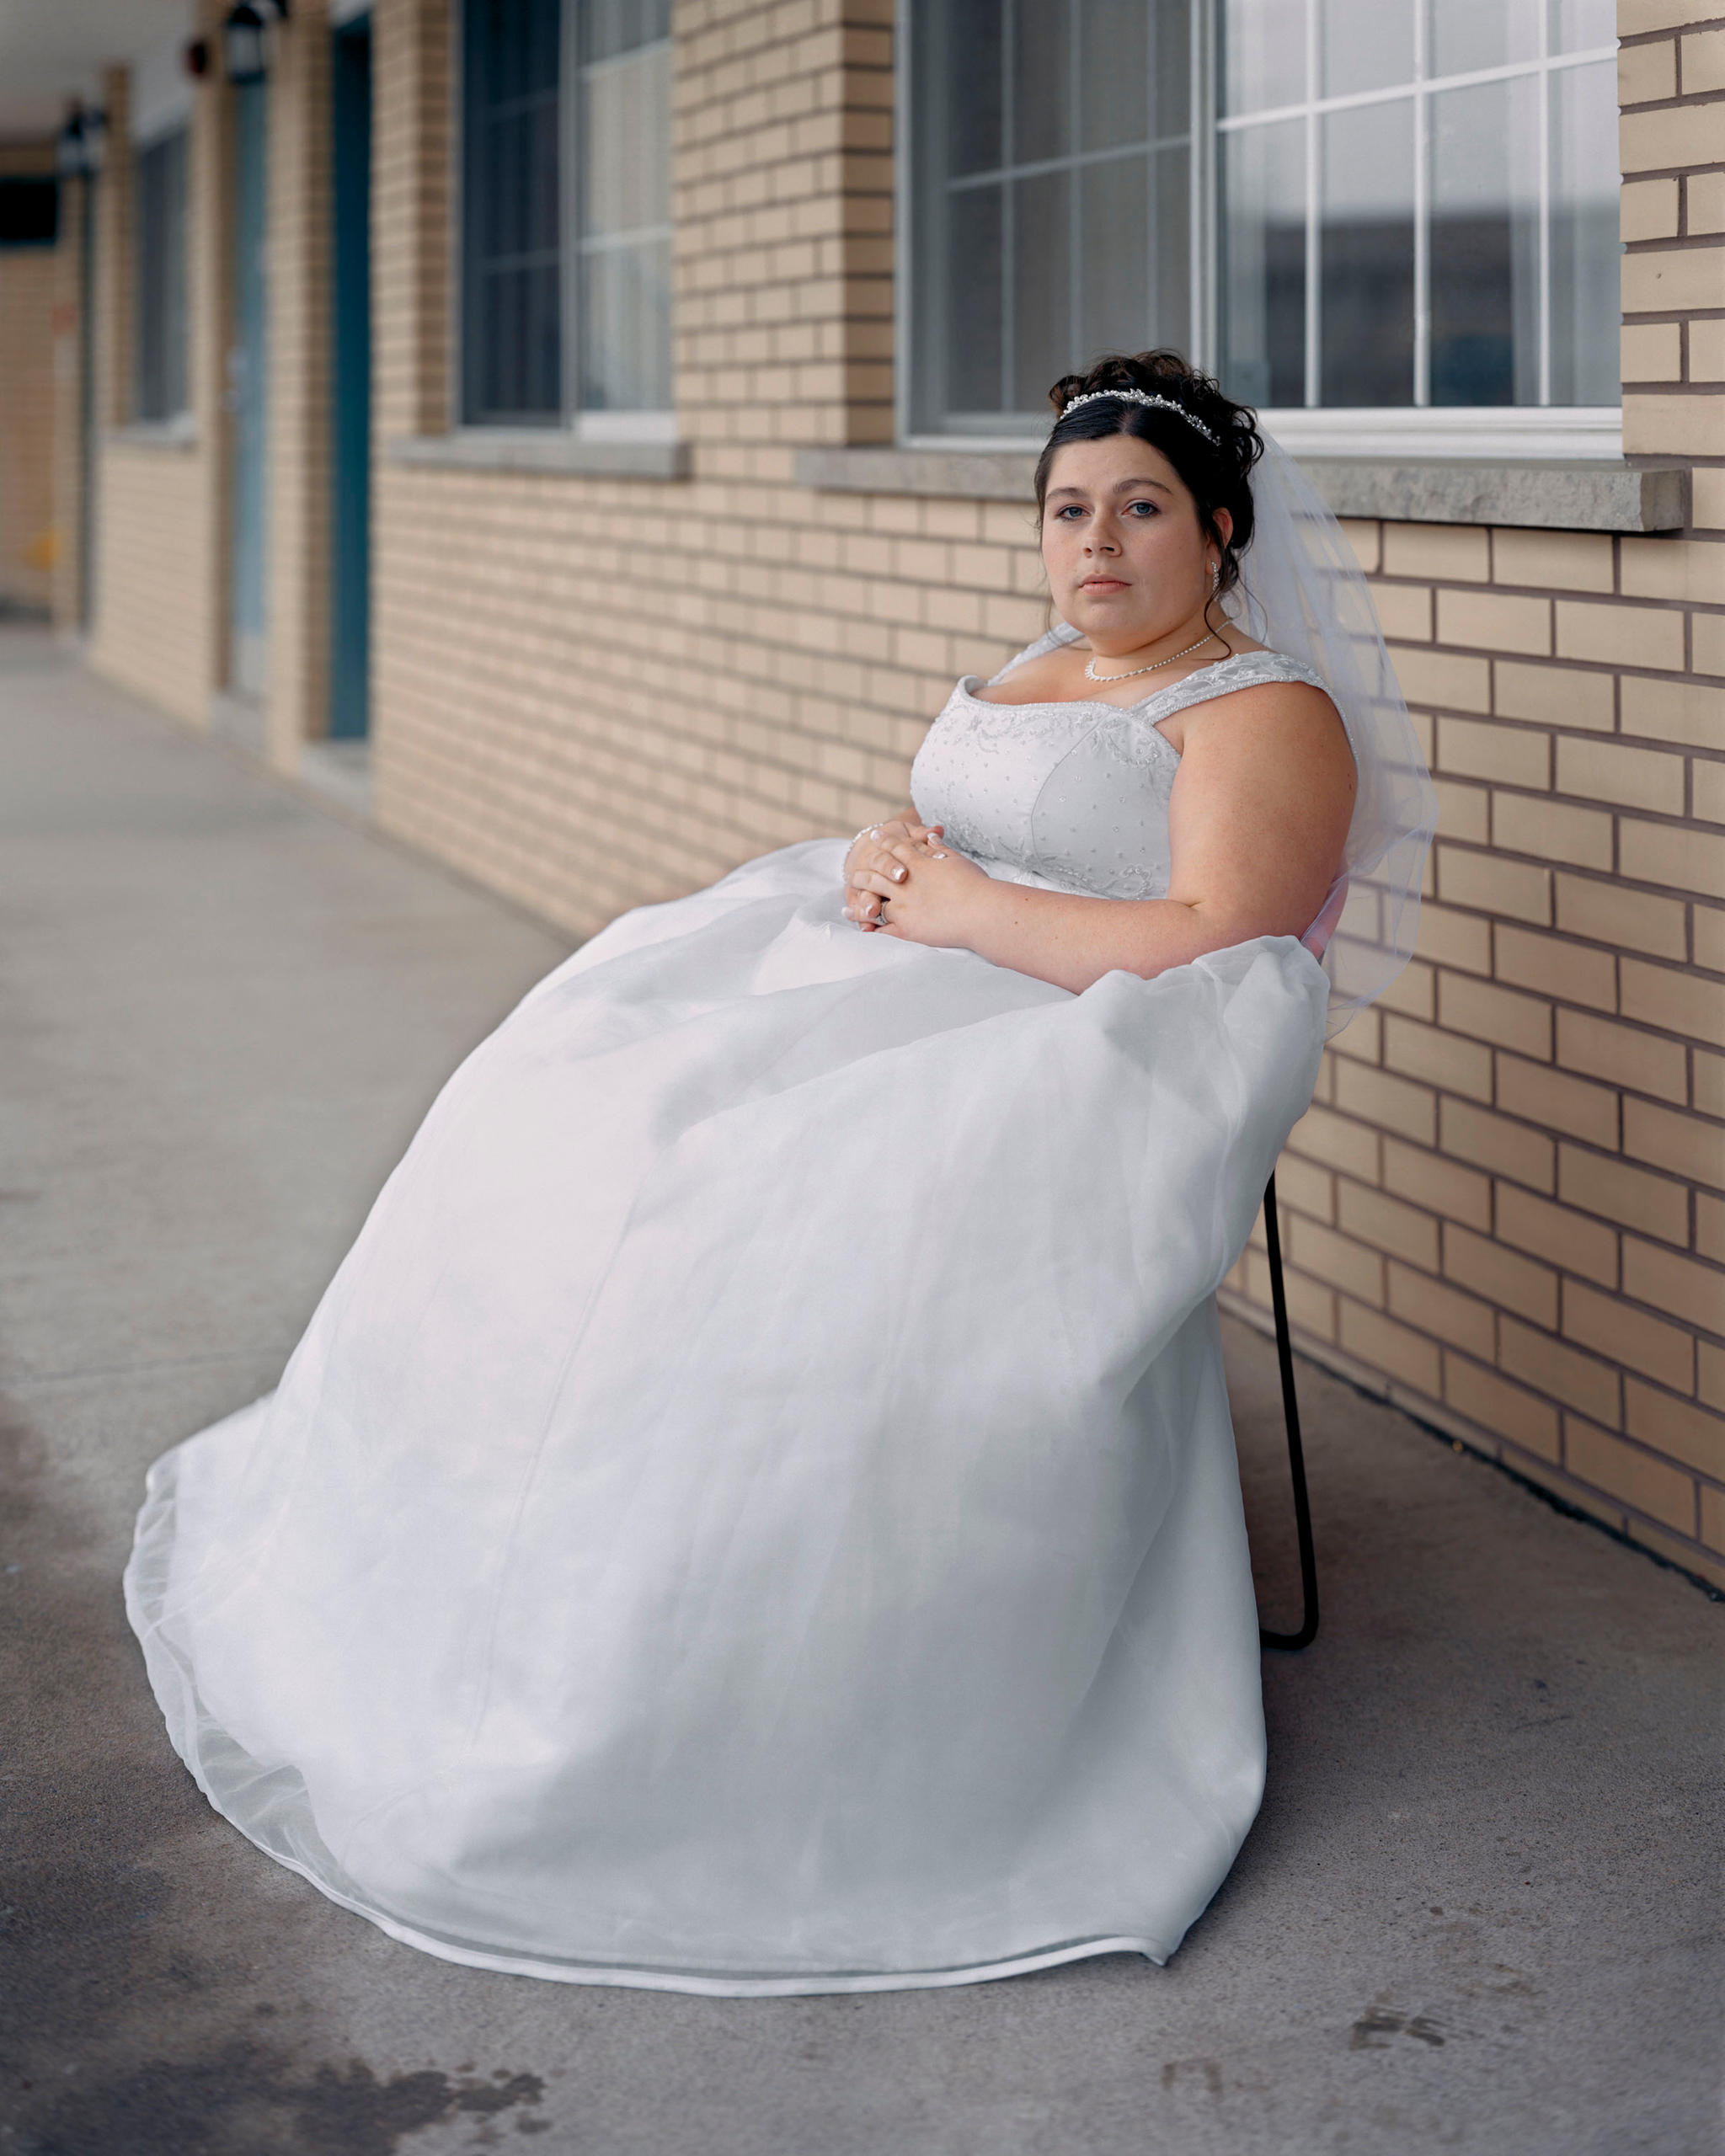 Portrait of a woman sitting on a chair and wearing a wedding dress